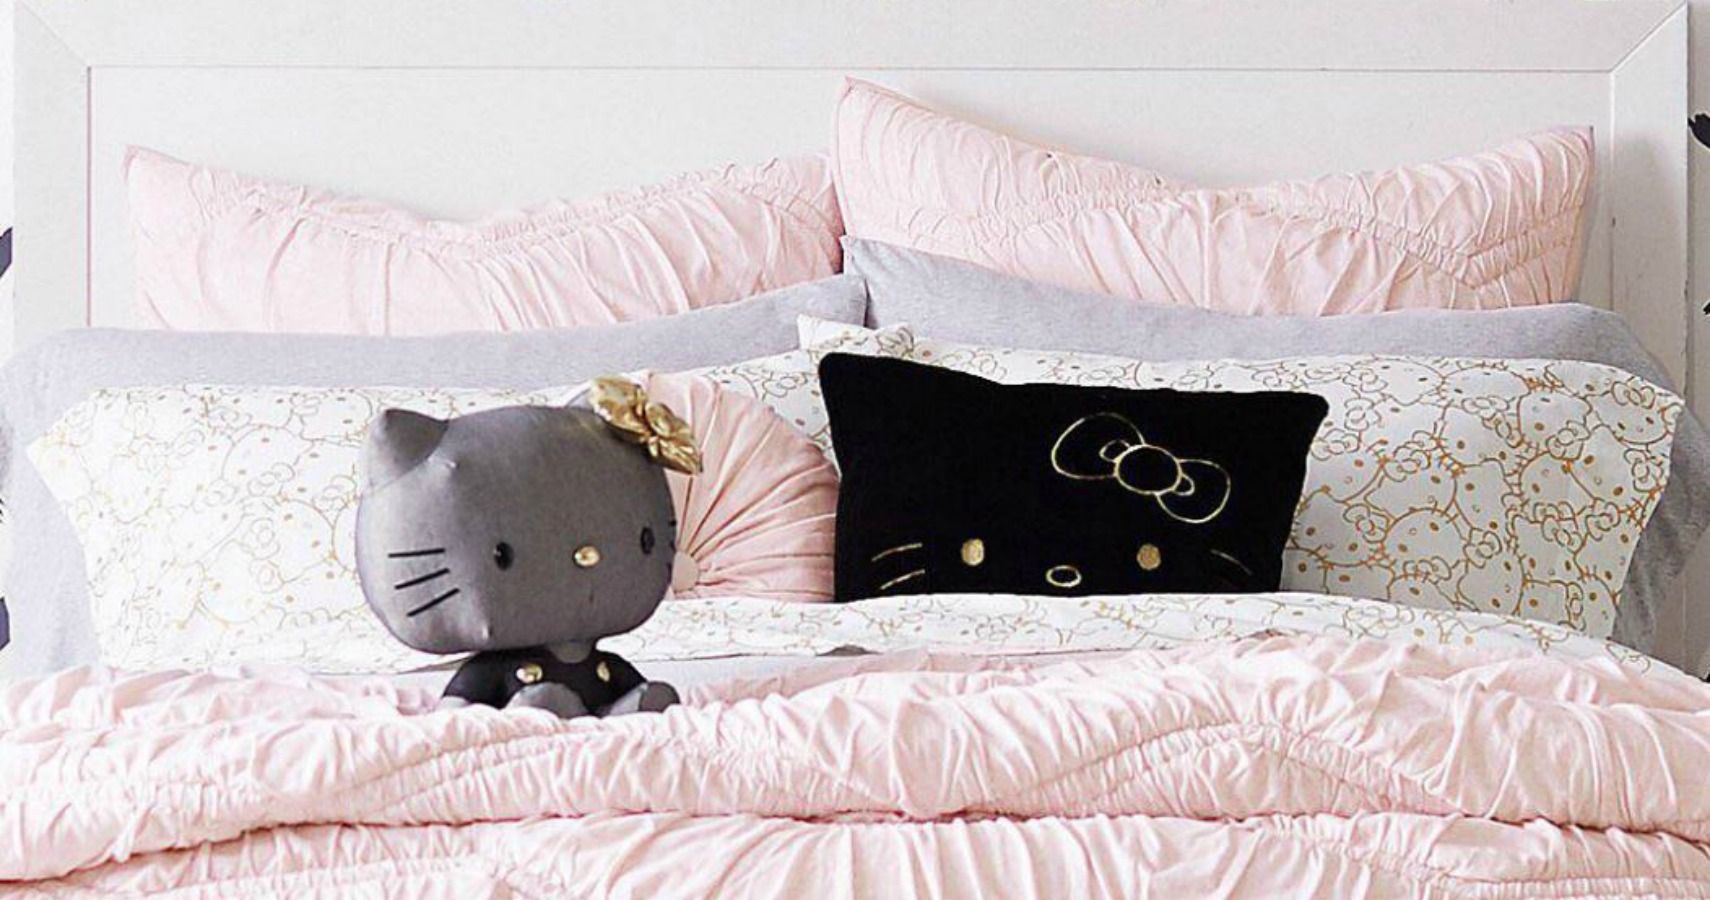 Pottery Barn's New Hello Kitty Collection Is the Cutest Thing Ever